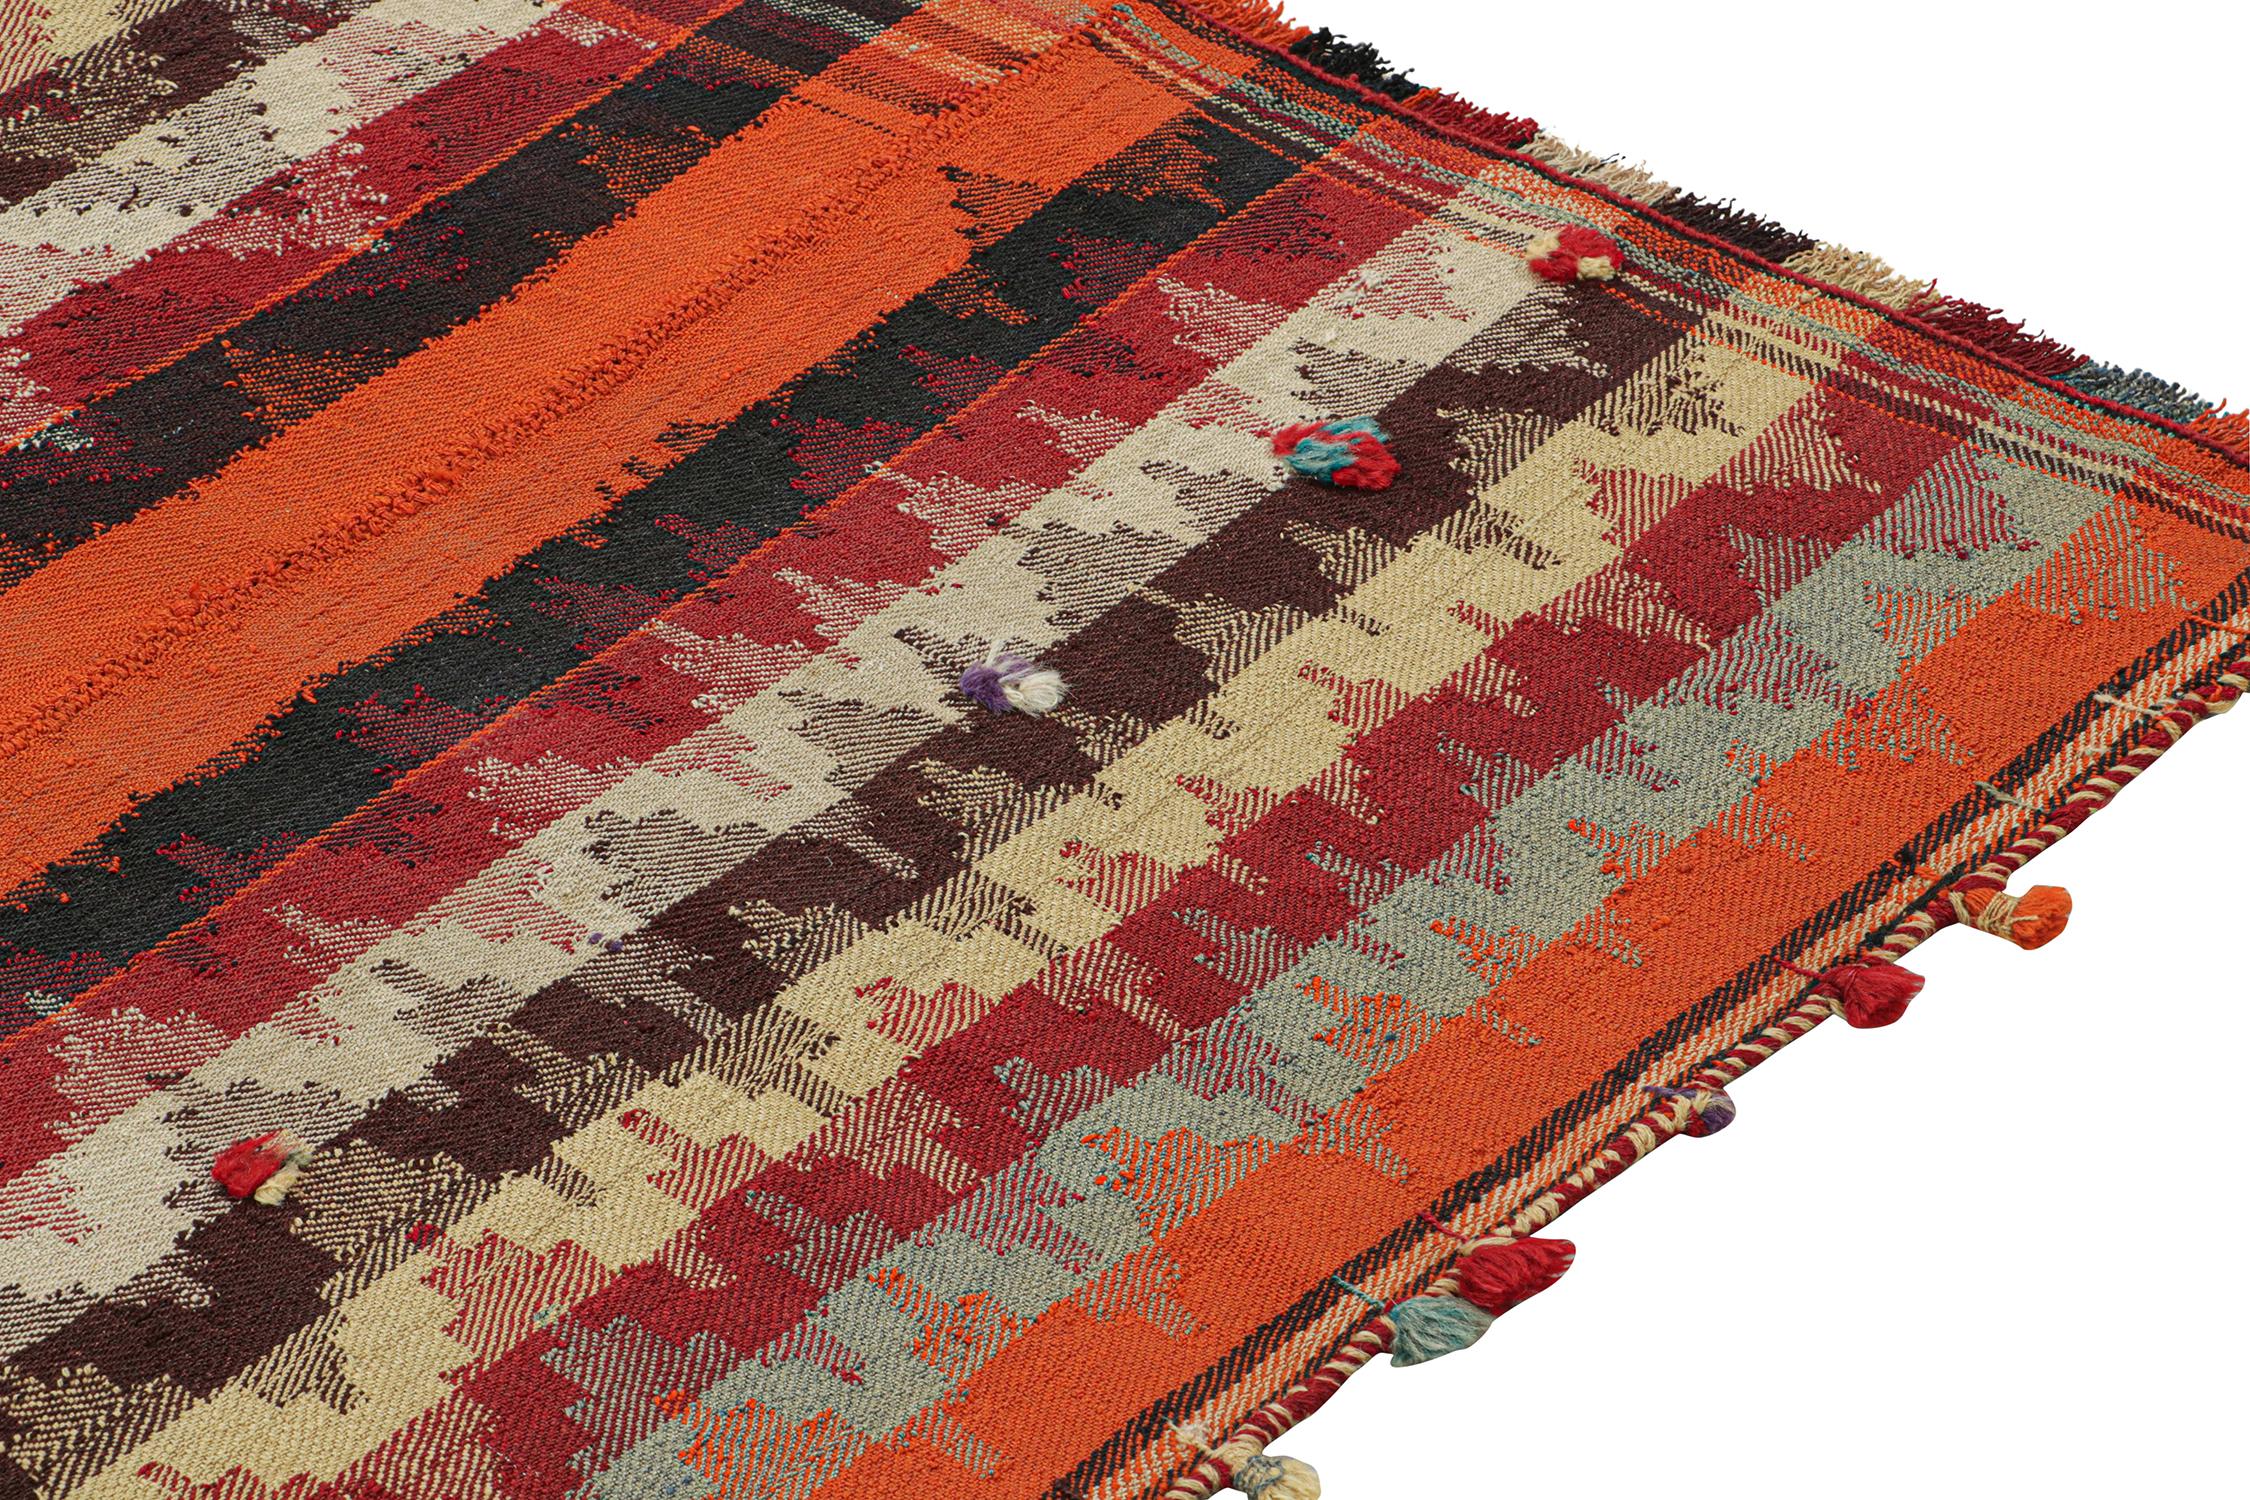 Vintage Persian Kilim in Orange with Stripes and Chevrons In Good Condition For Sale In Long Island City, NY